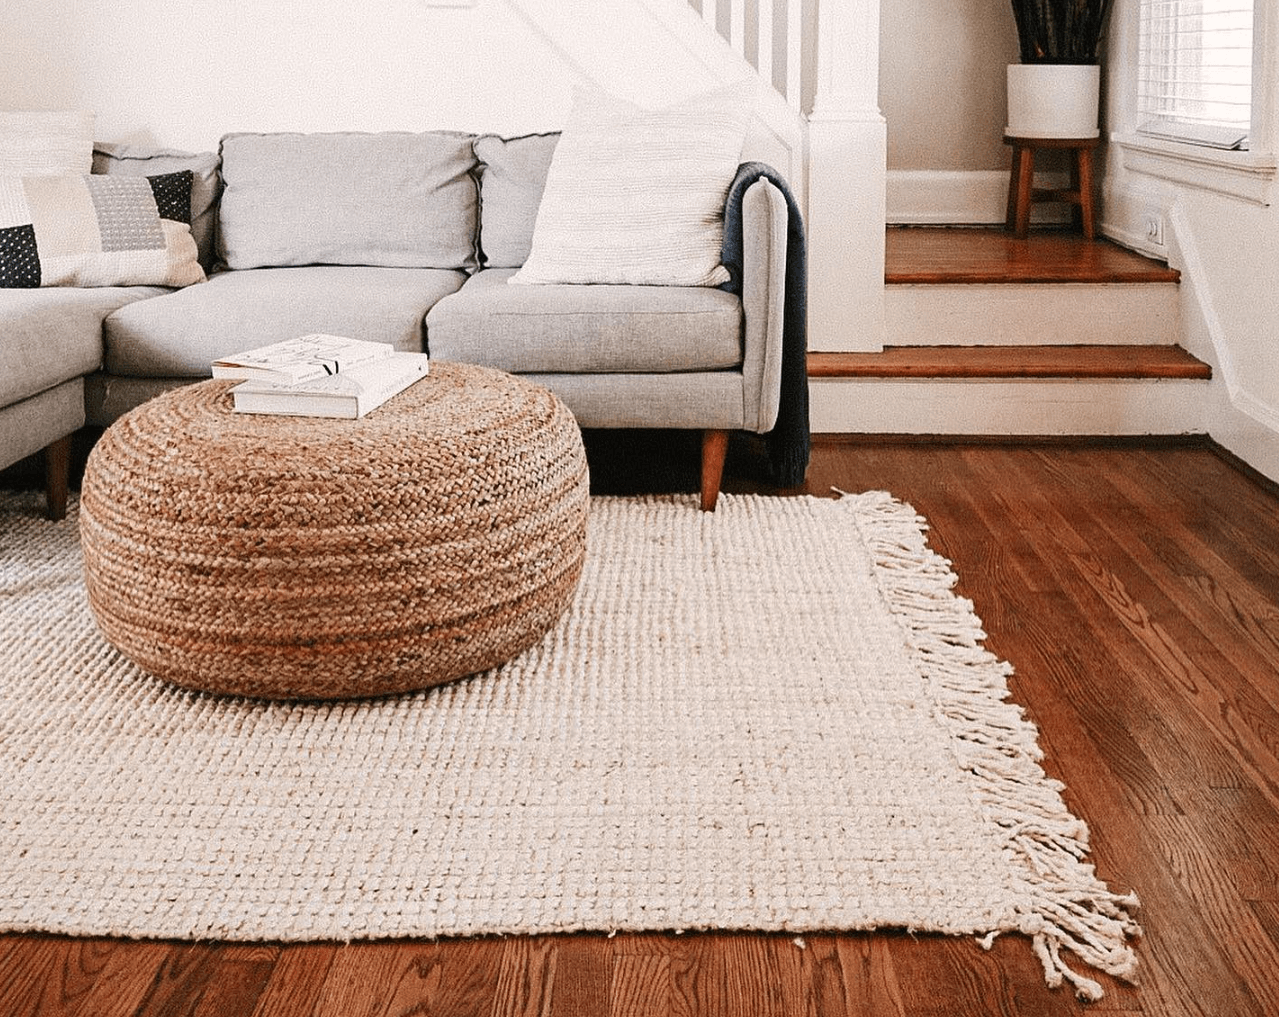 Living room with a light gray sofra and a woven coffee table with a white area rug with tassels on it. 